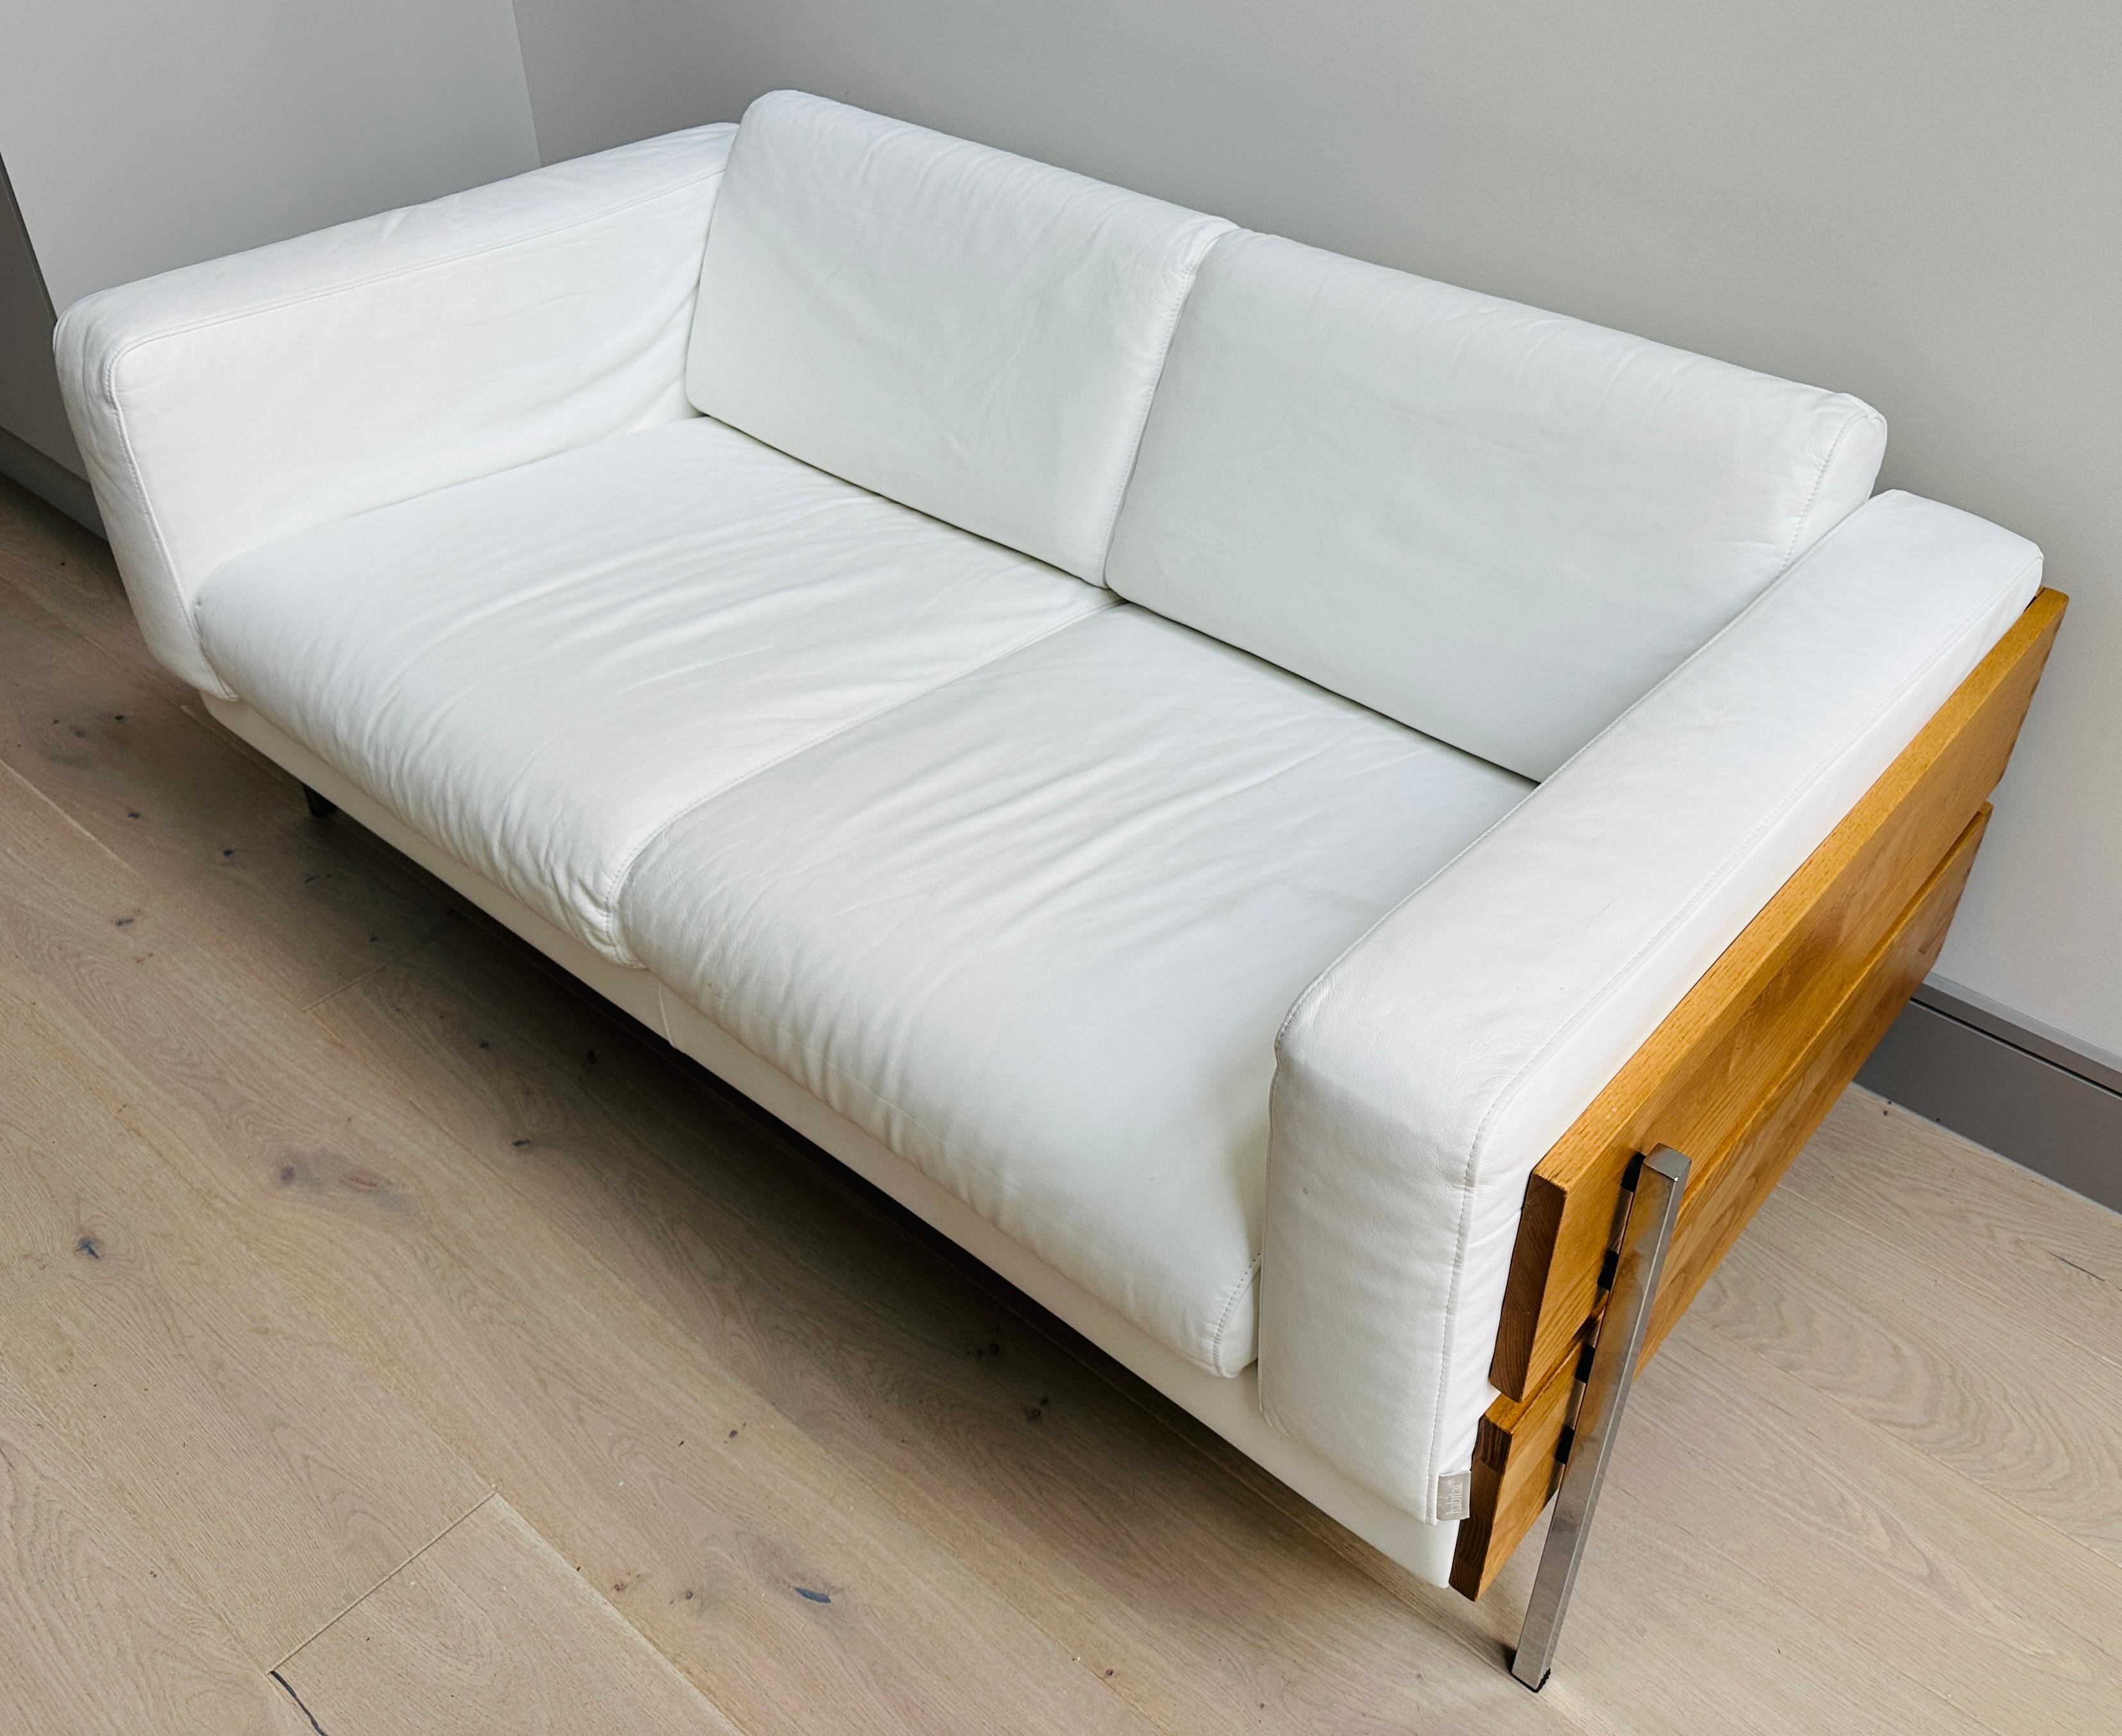 Polished 2000s White Leather 2-Seater Robin Day for Habitat Sofa